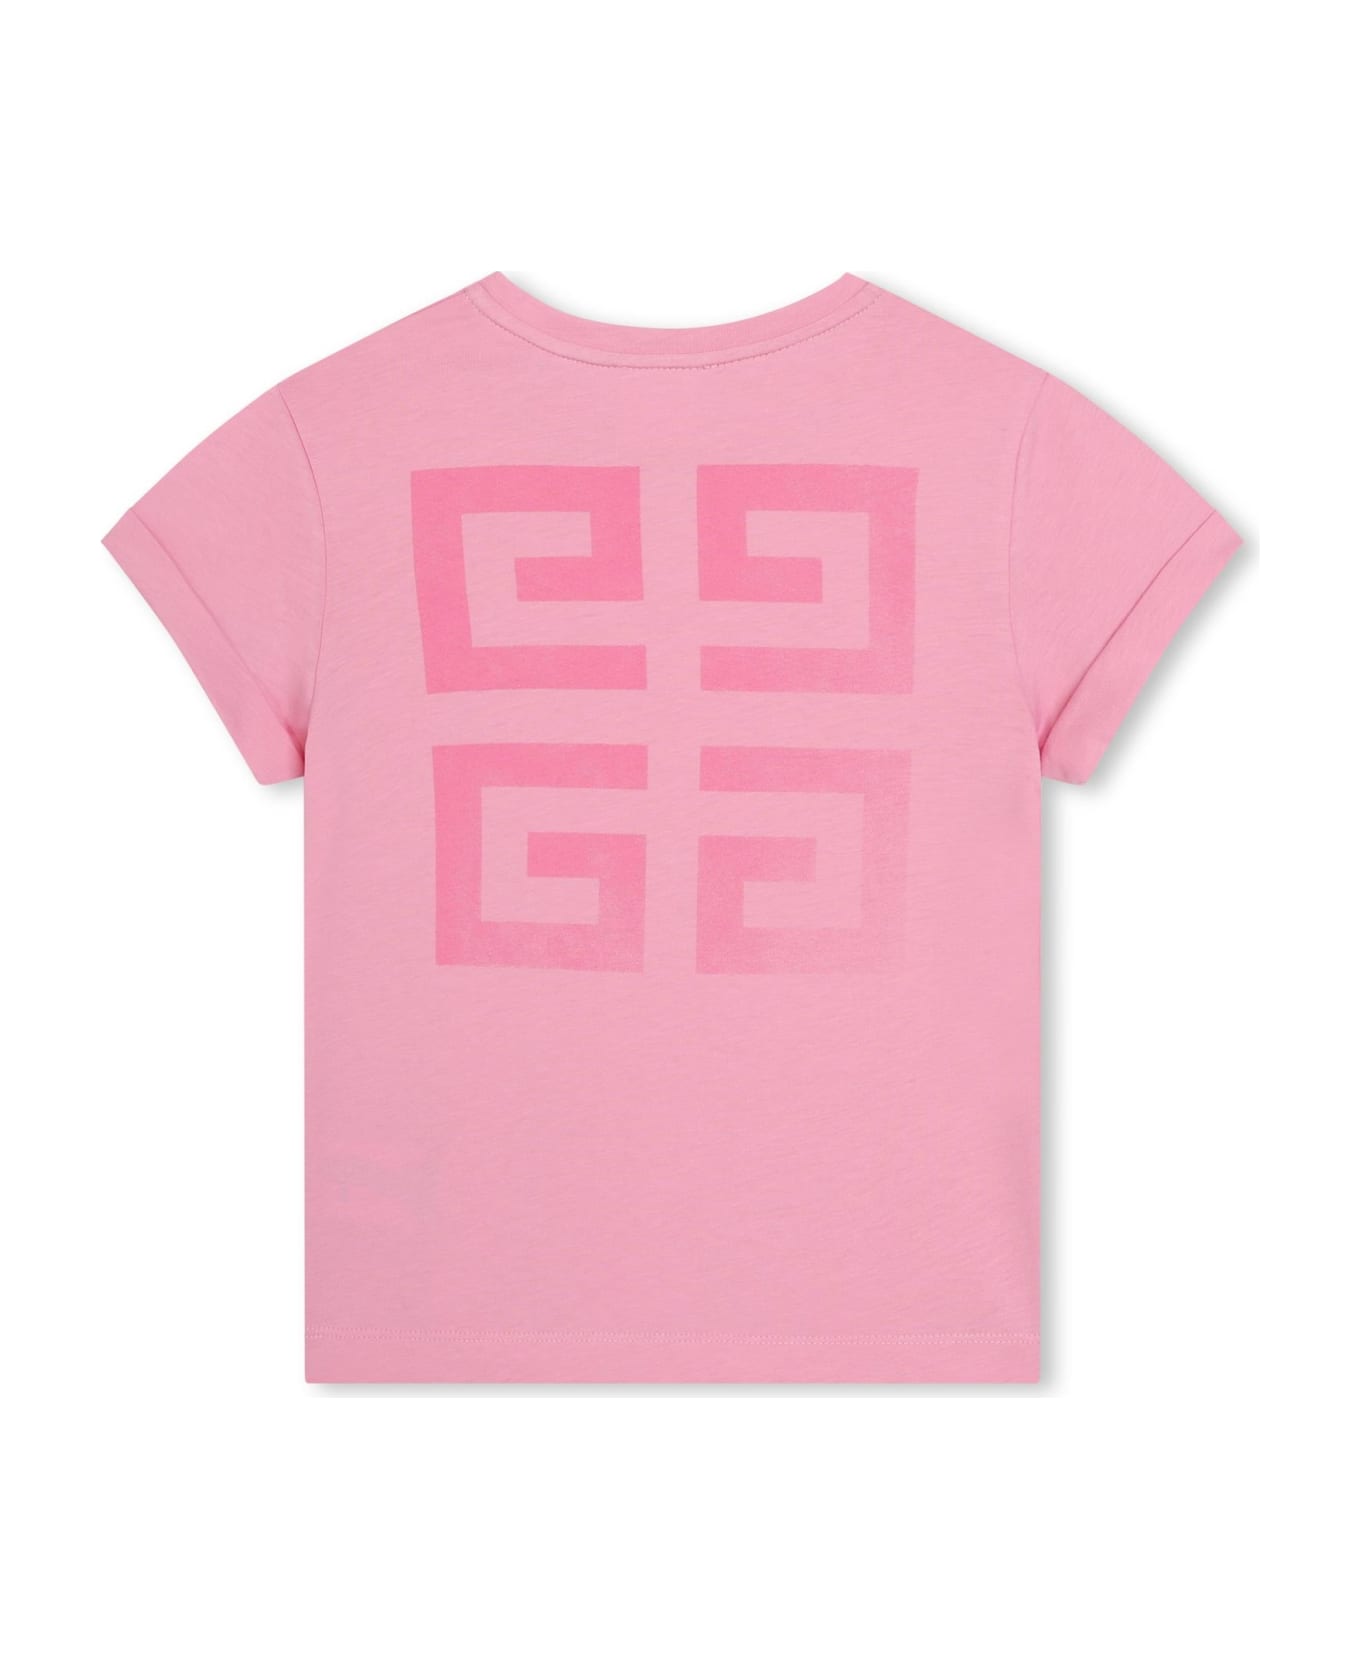 Givenchy T-shirt With 4g Print - Pink Tシャツ＆ポロシャツ